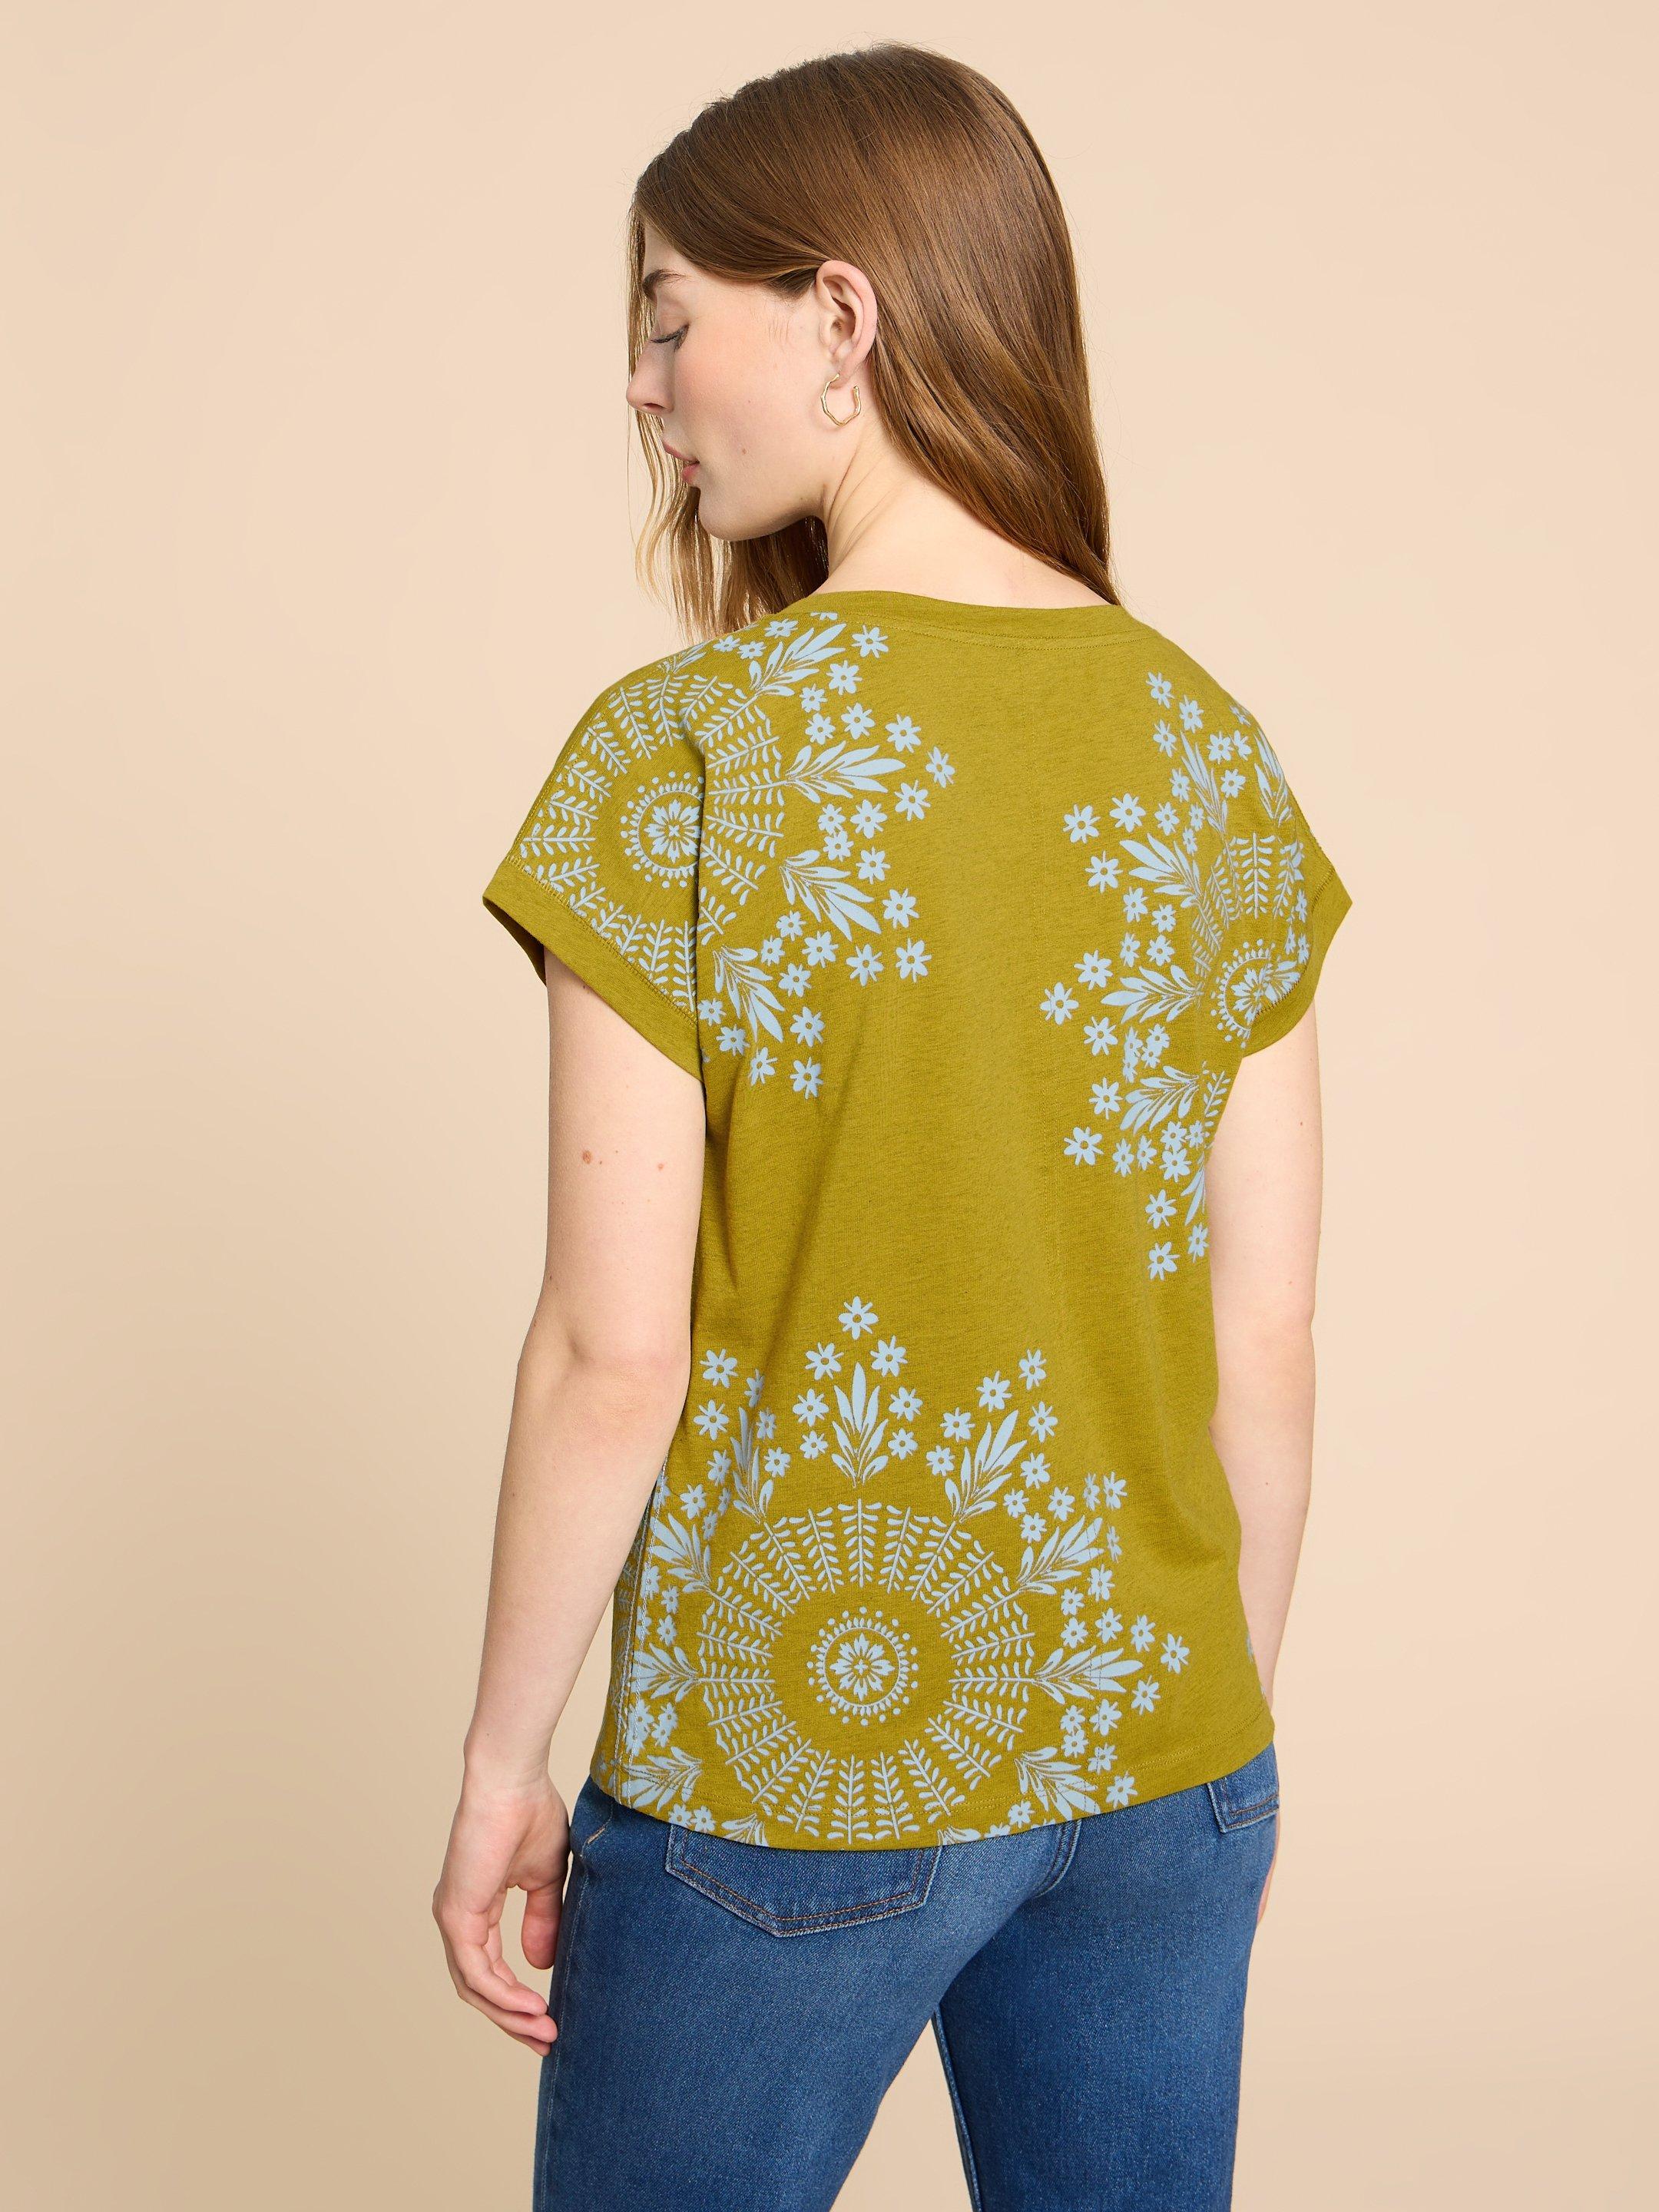 NELLY NOTCH NECK COTTON TEE in CHART PR - MODEL BACK